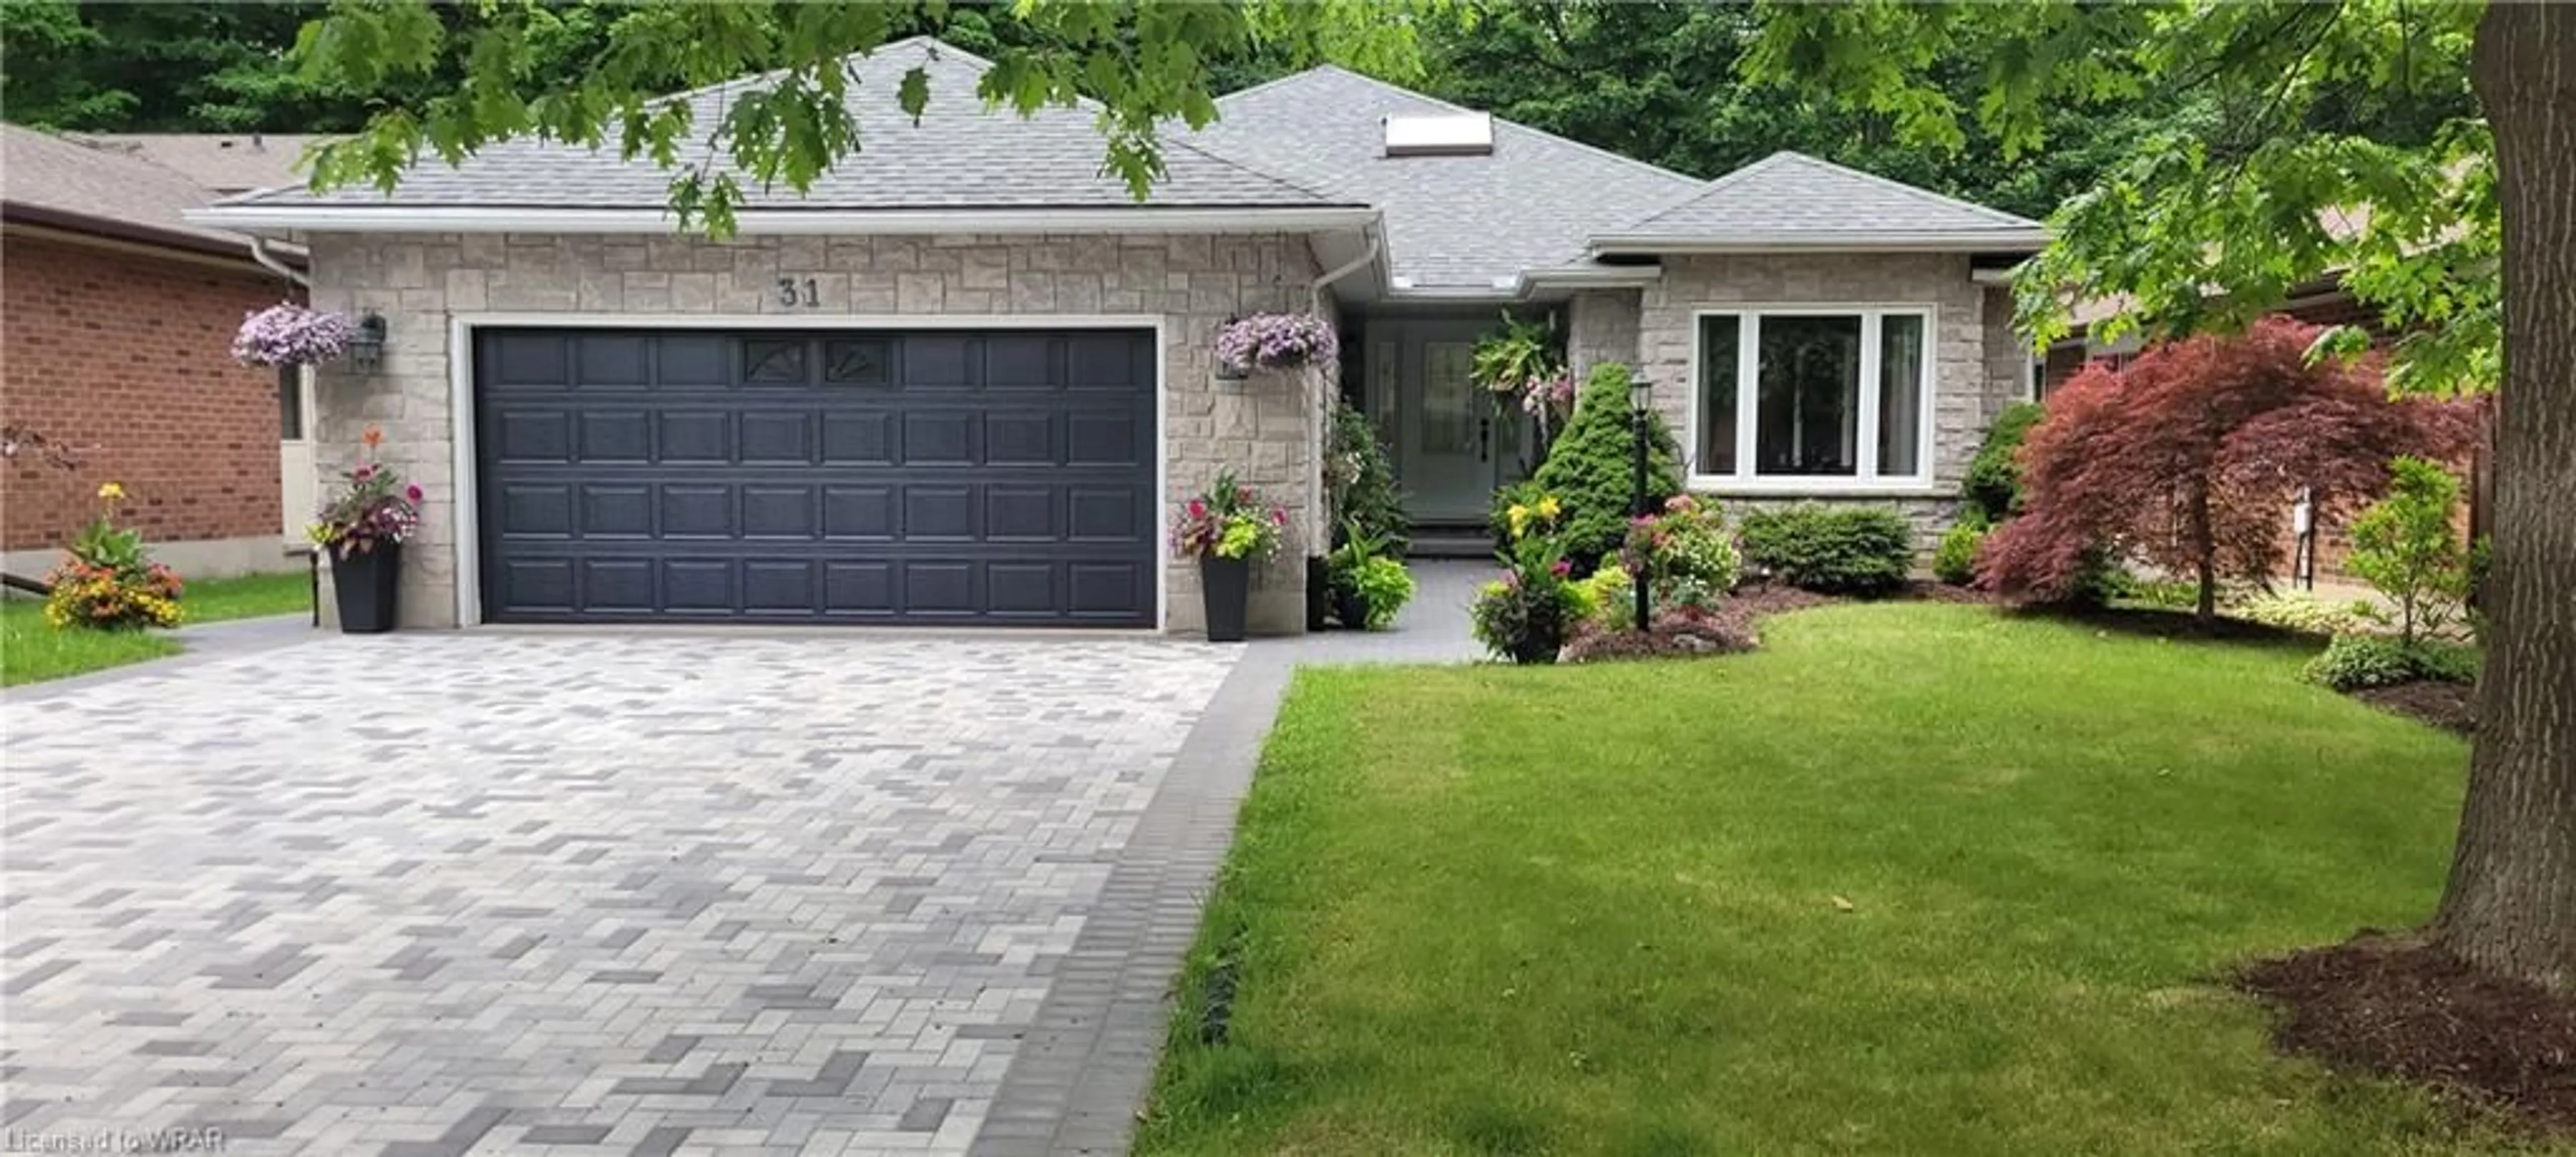 Home with brick exterior material for 31 Kilbirnie Crt, Kitchener Ontario N2R 1B7